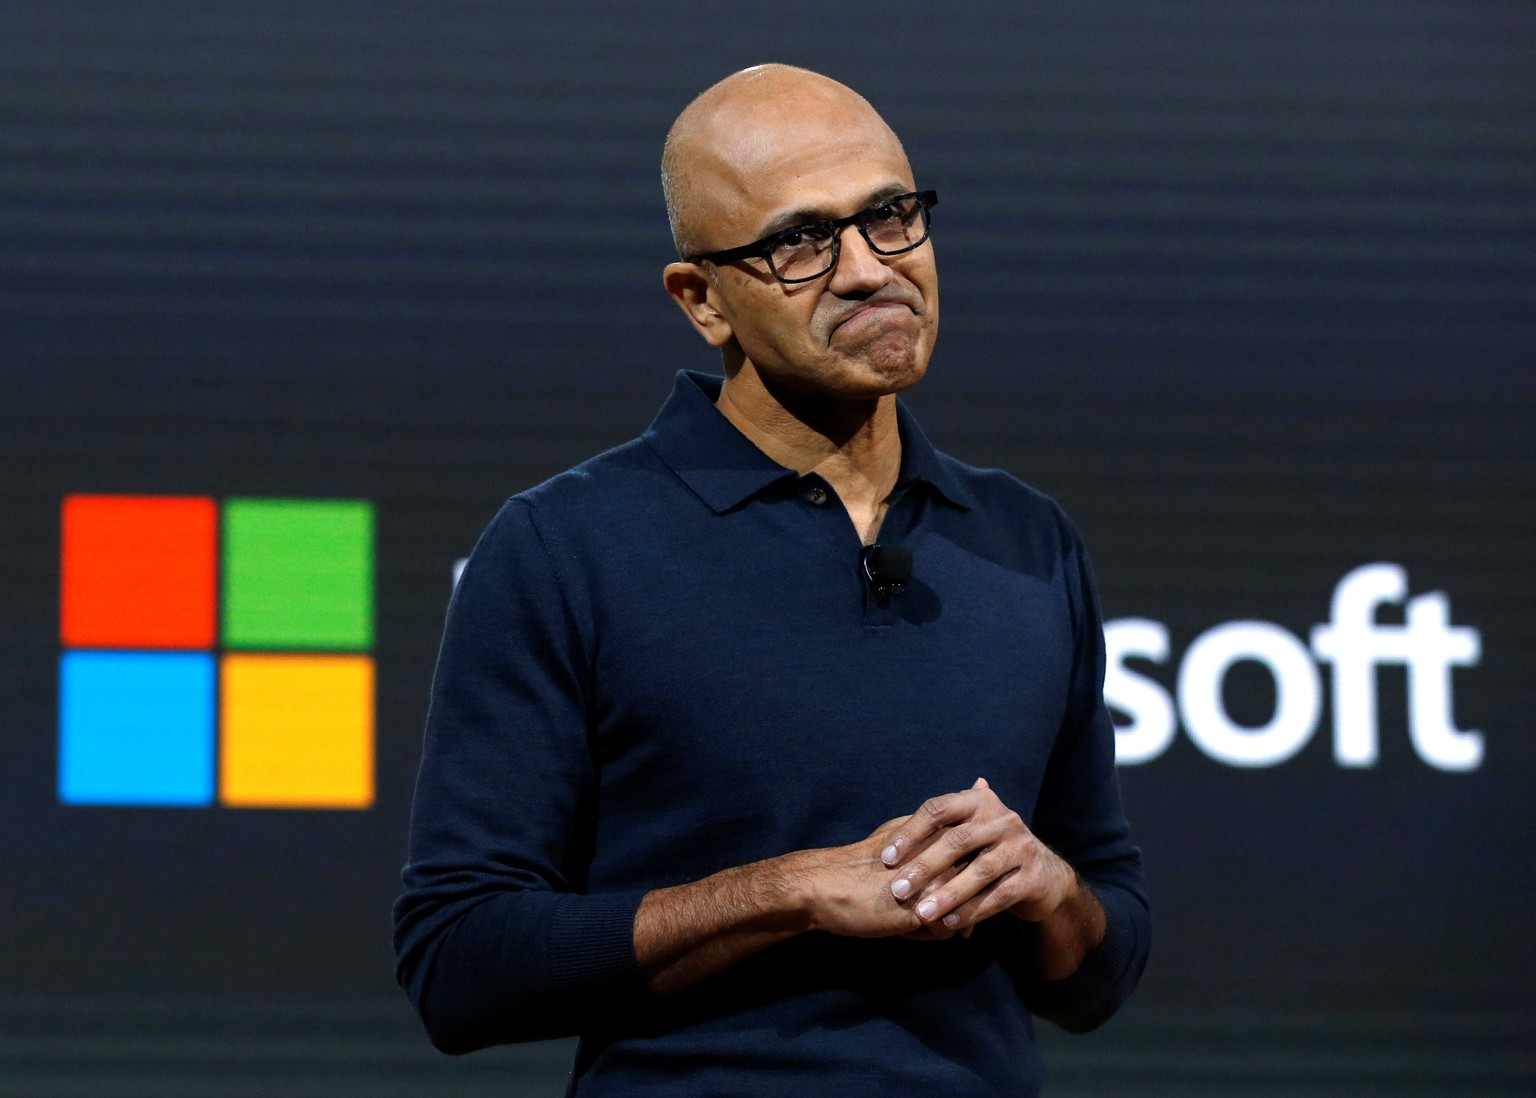 Microsoft Chief Executive Officer (CEO) Satya Narayana Nadella speaks at a live Microsoft event in the Manhattan borough of New York City, October 26, 2016. REUTERS/Lucas Jackson